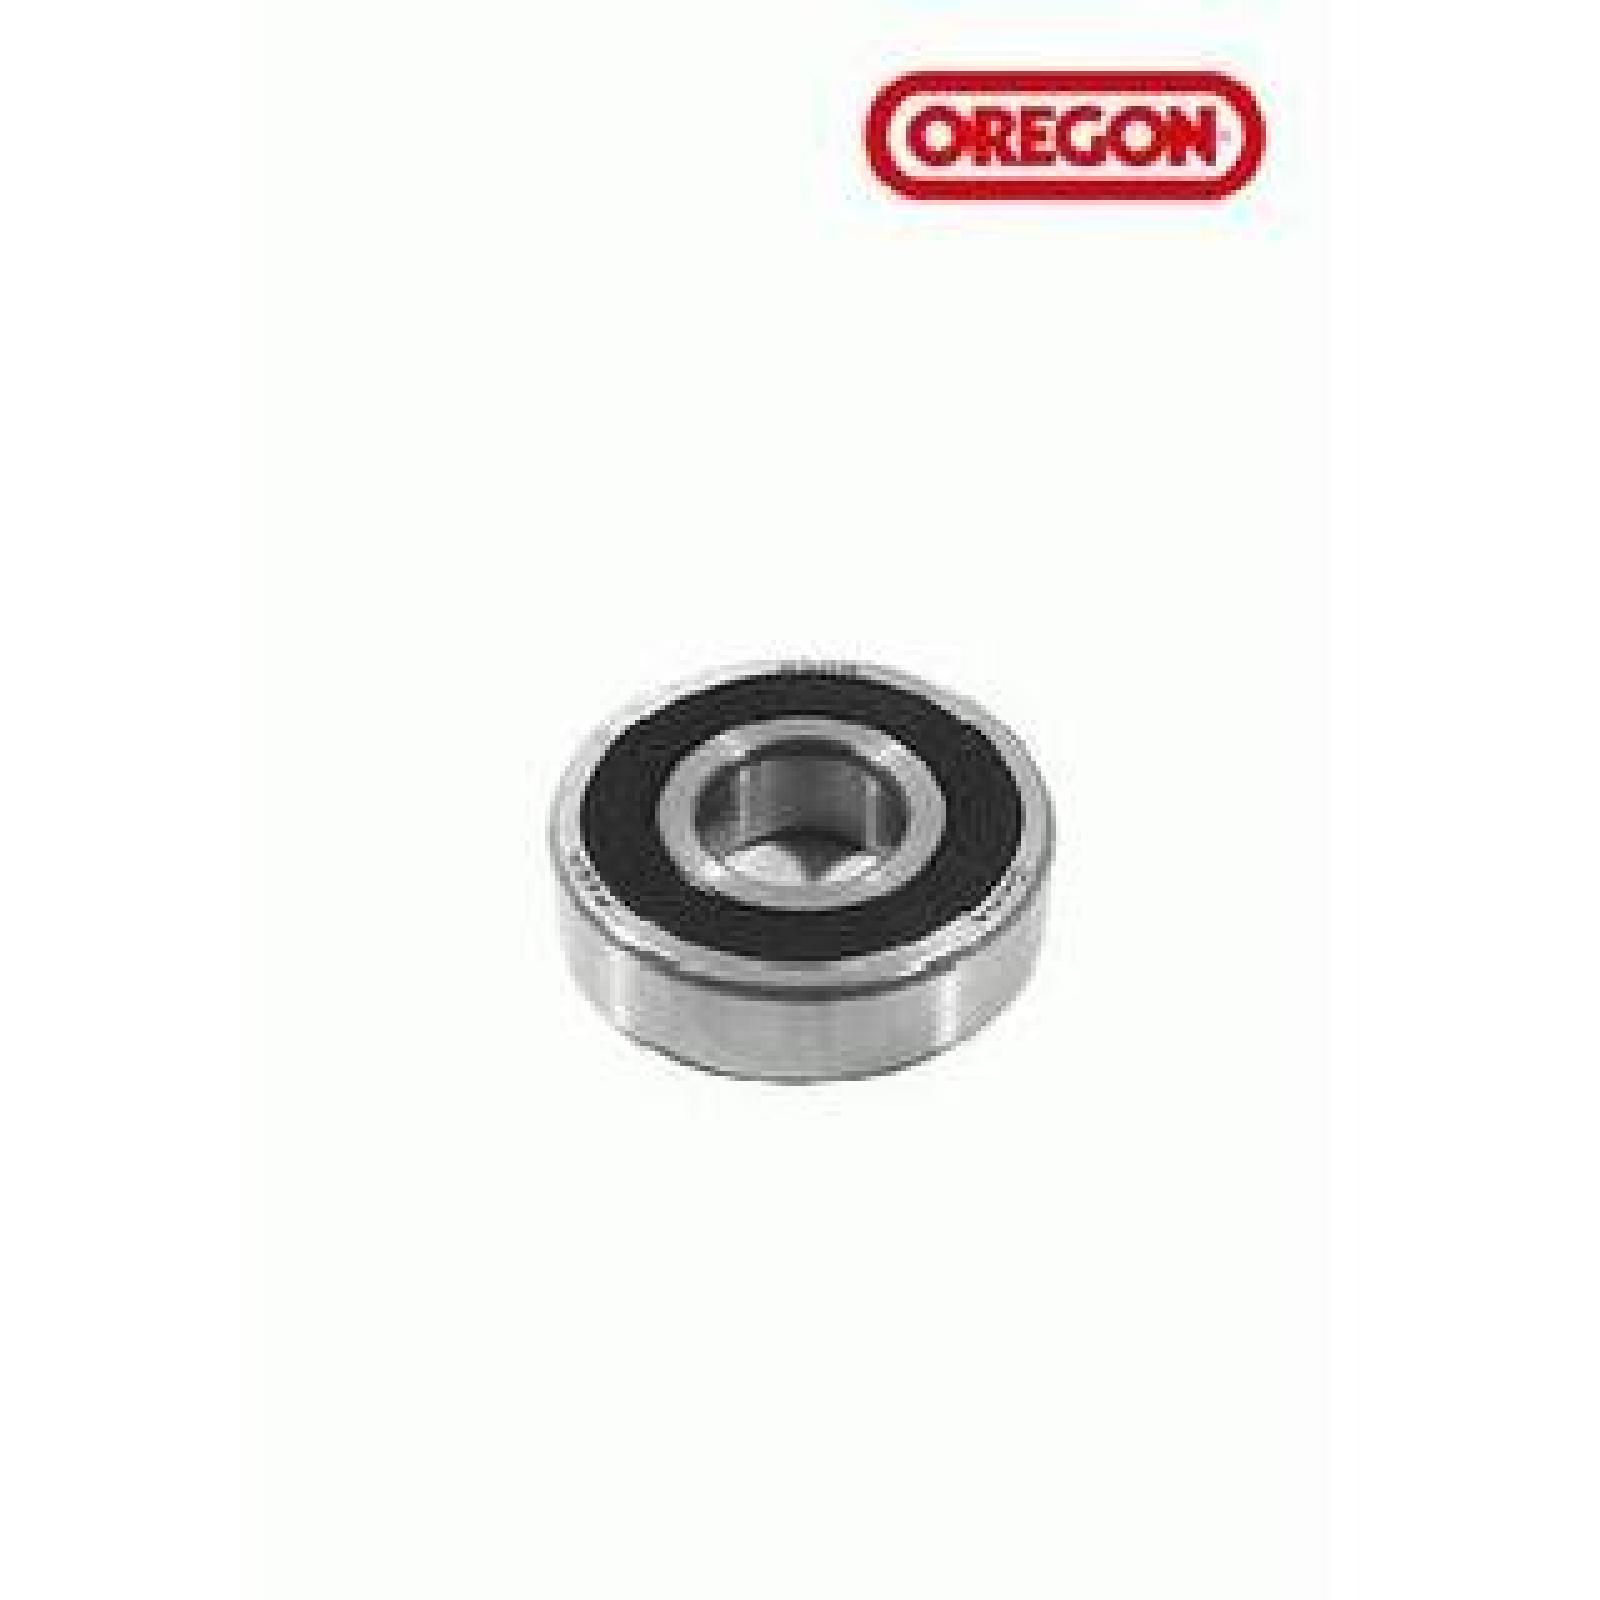 BEARING, BALL MAGNUM 6305 part# 45220 by Oregon